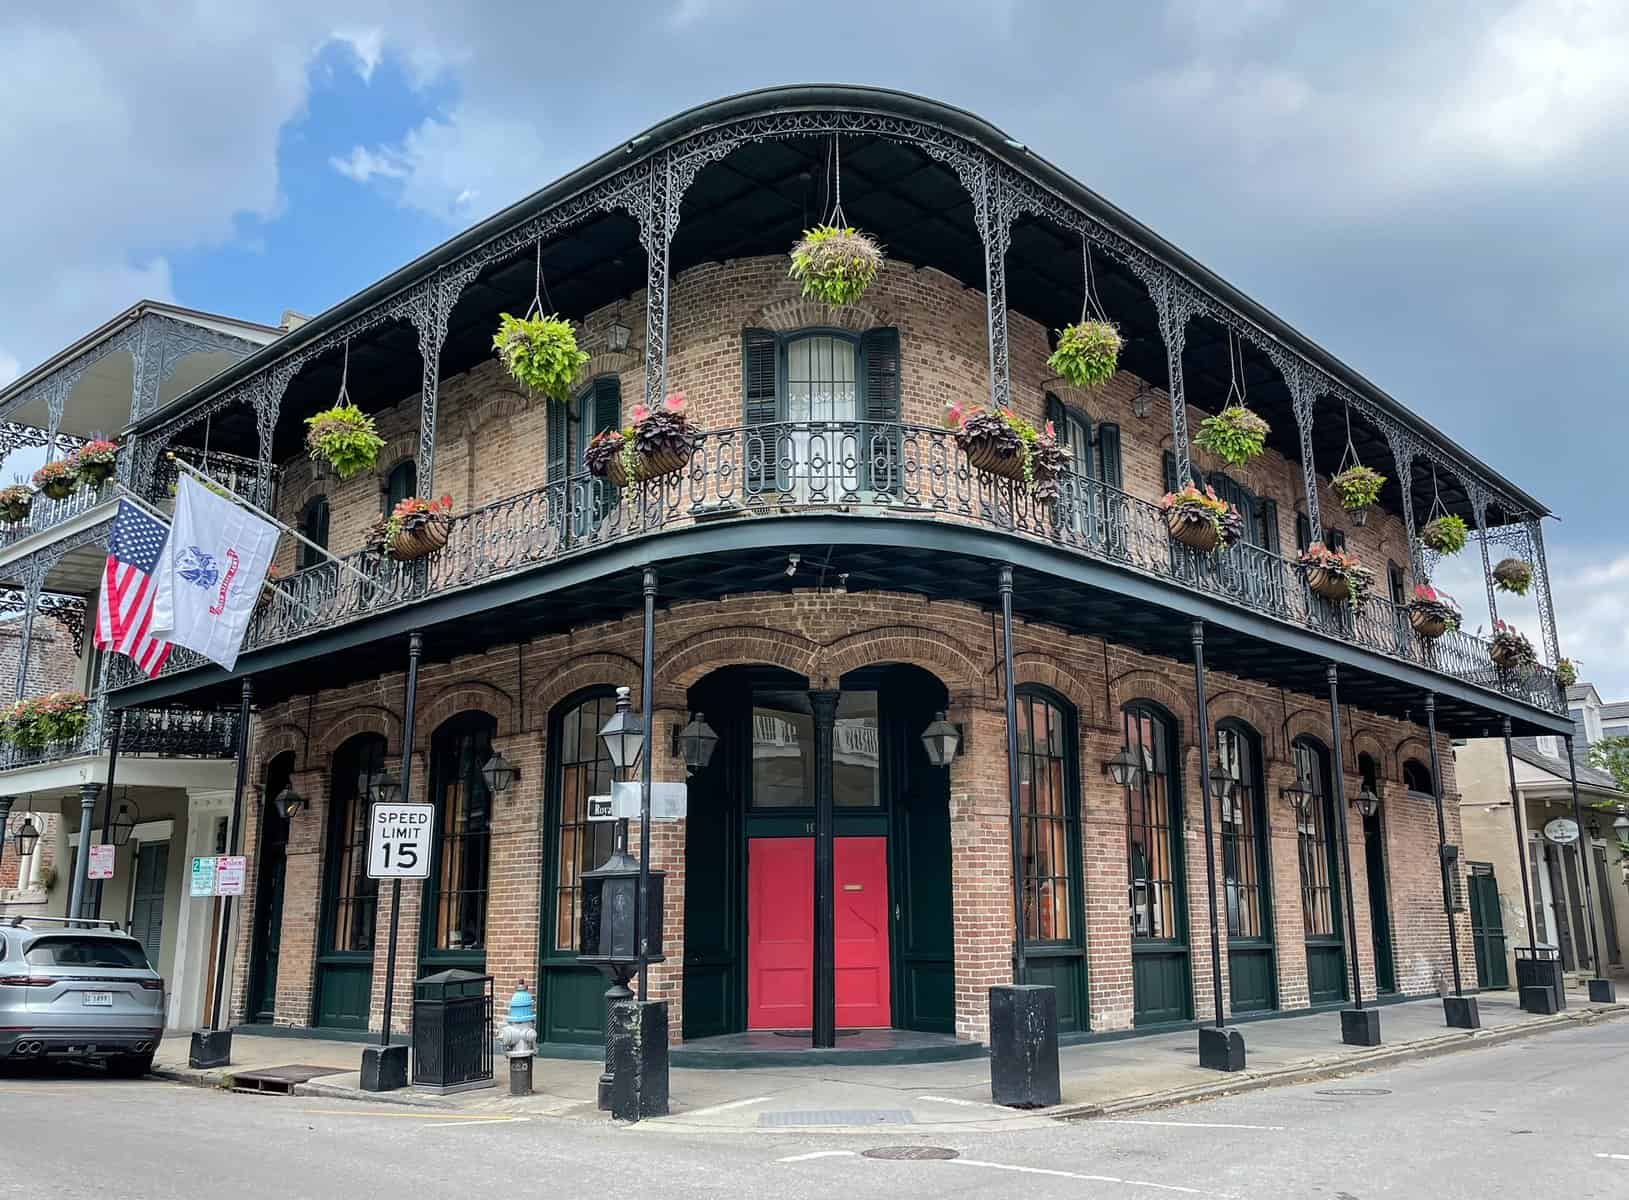 A classic 2-story building in the French Quarter of New Orleans with a balcony, hanging plants, and a bright red door.